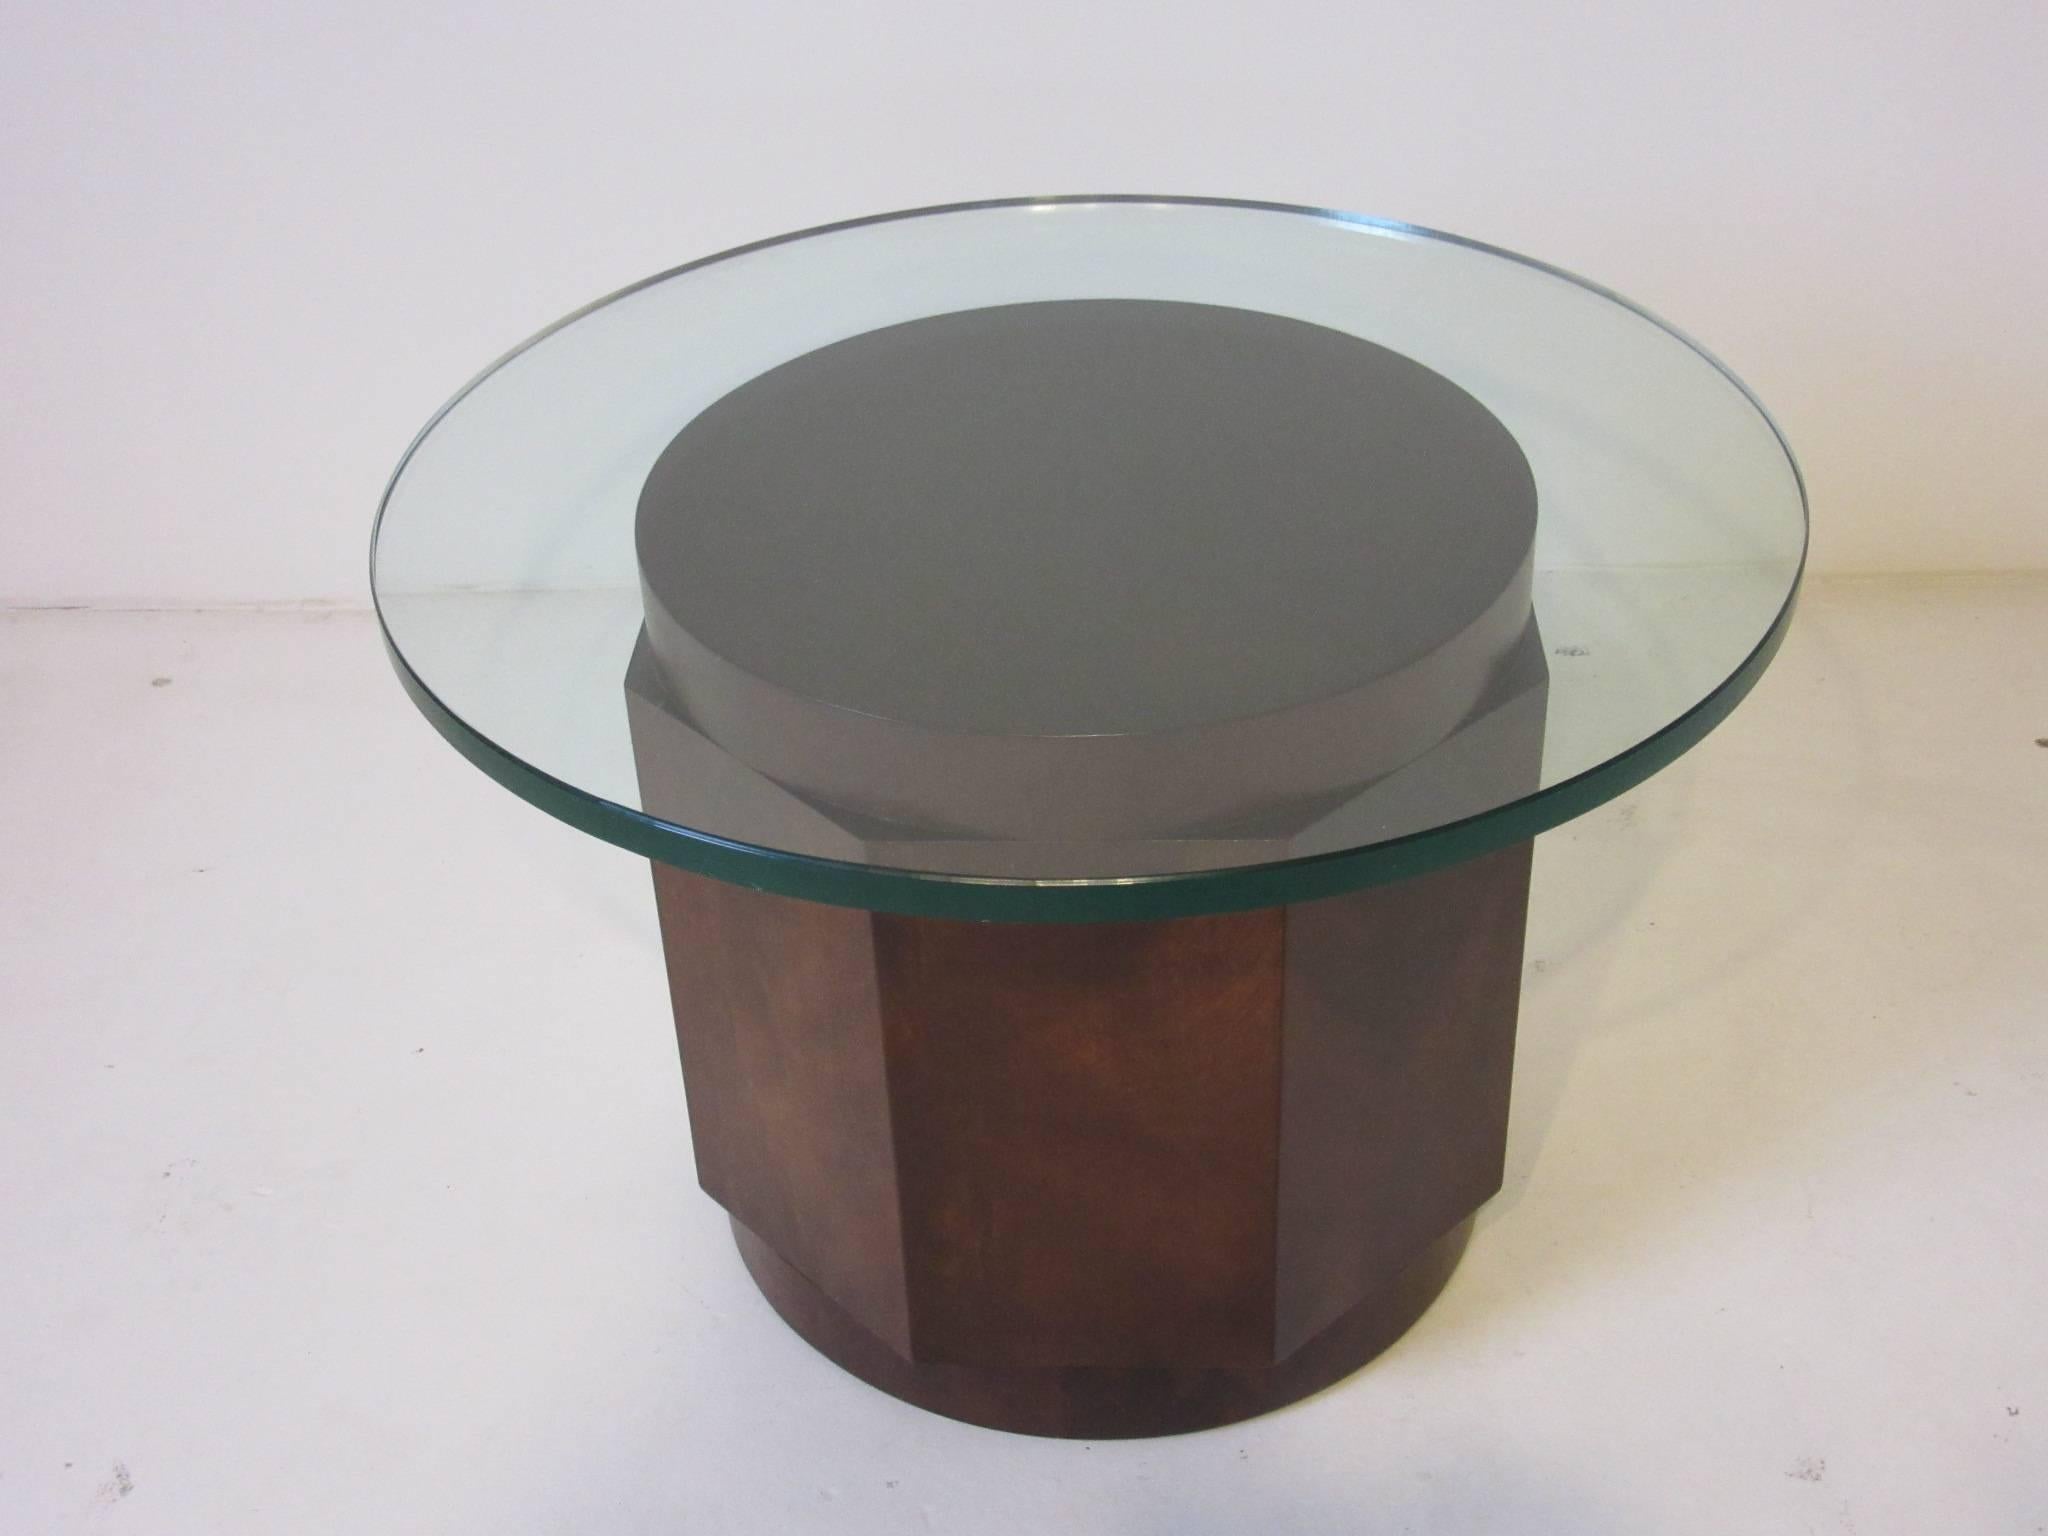 A dark walnut octagon shaped side table with round plate glass top designed by Edward Wormley for the Dunbar furniture company. A rich and well crafted piece of furniture that will last a lifetime.